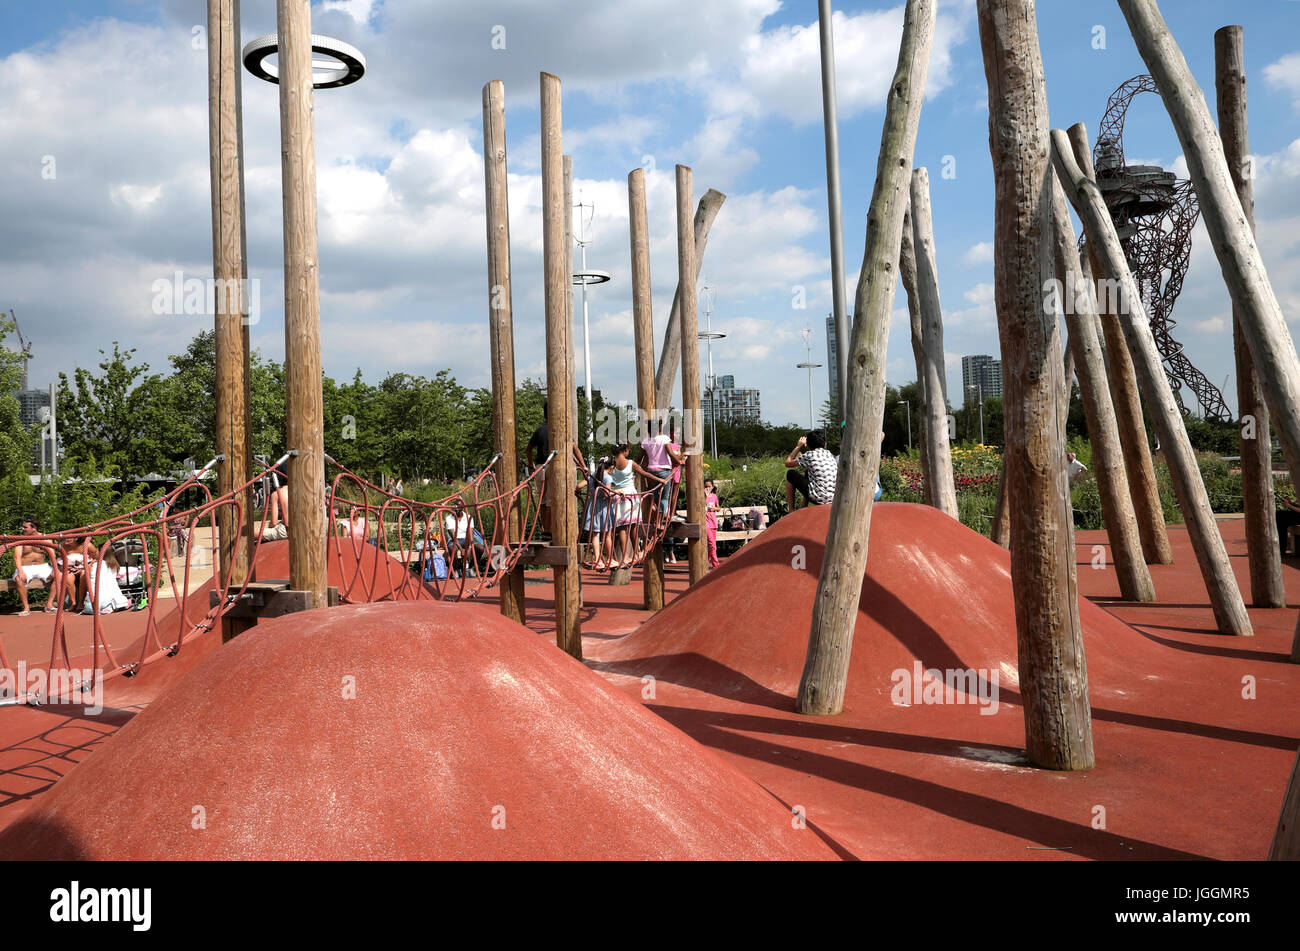 Childrens playground with pole structure & kids playing outside in the Queen Elizabeth Olympic Park in Stratford, East London England UK  KATHY DEWITT Stock Photo